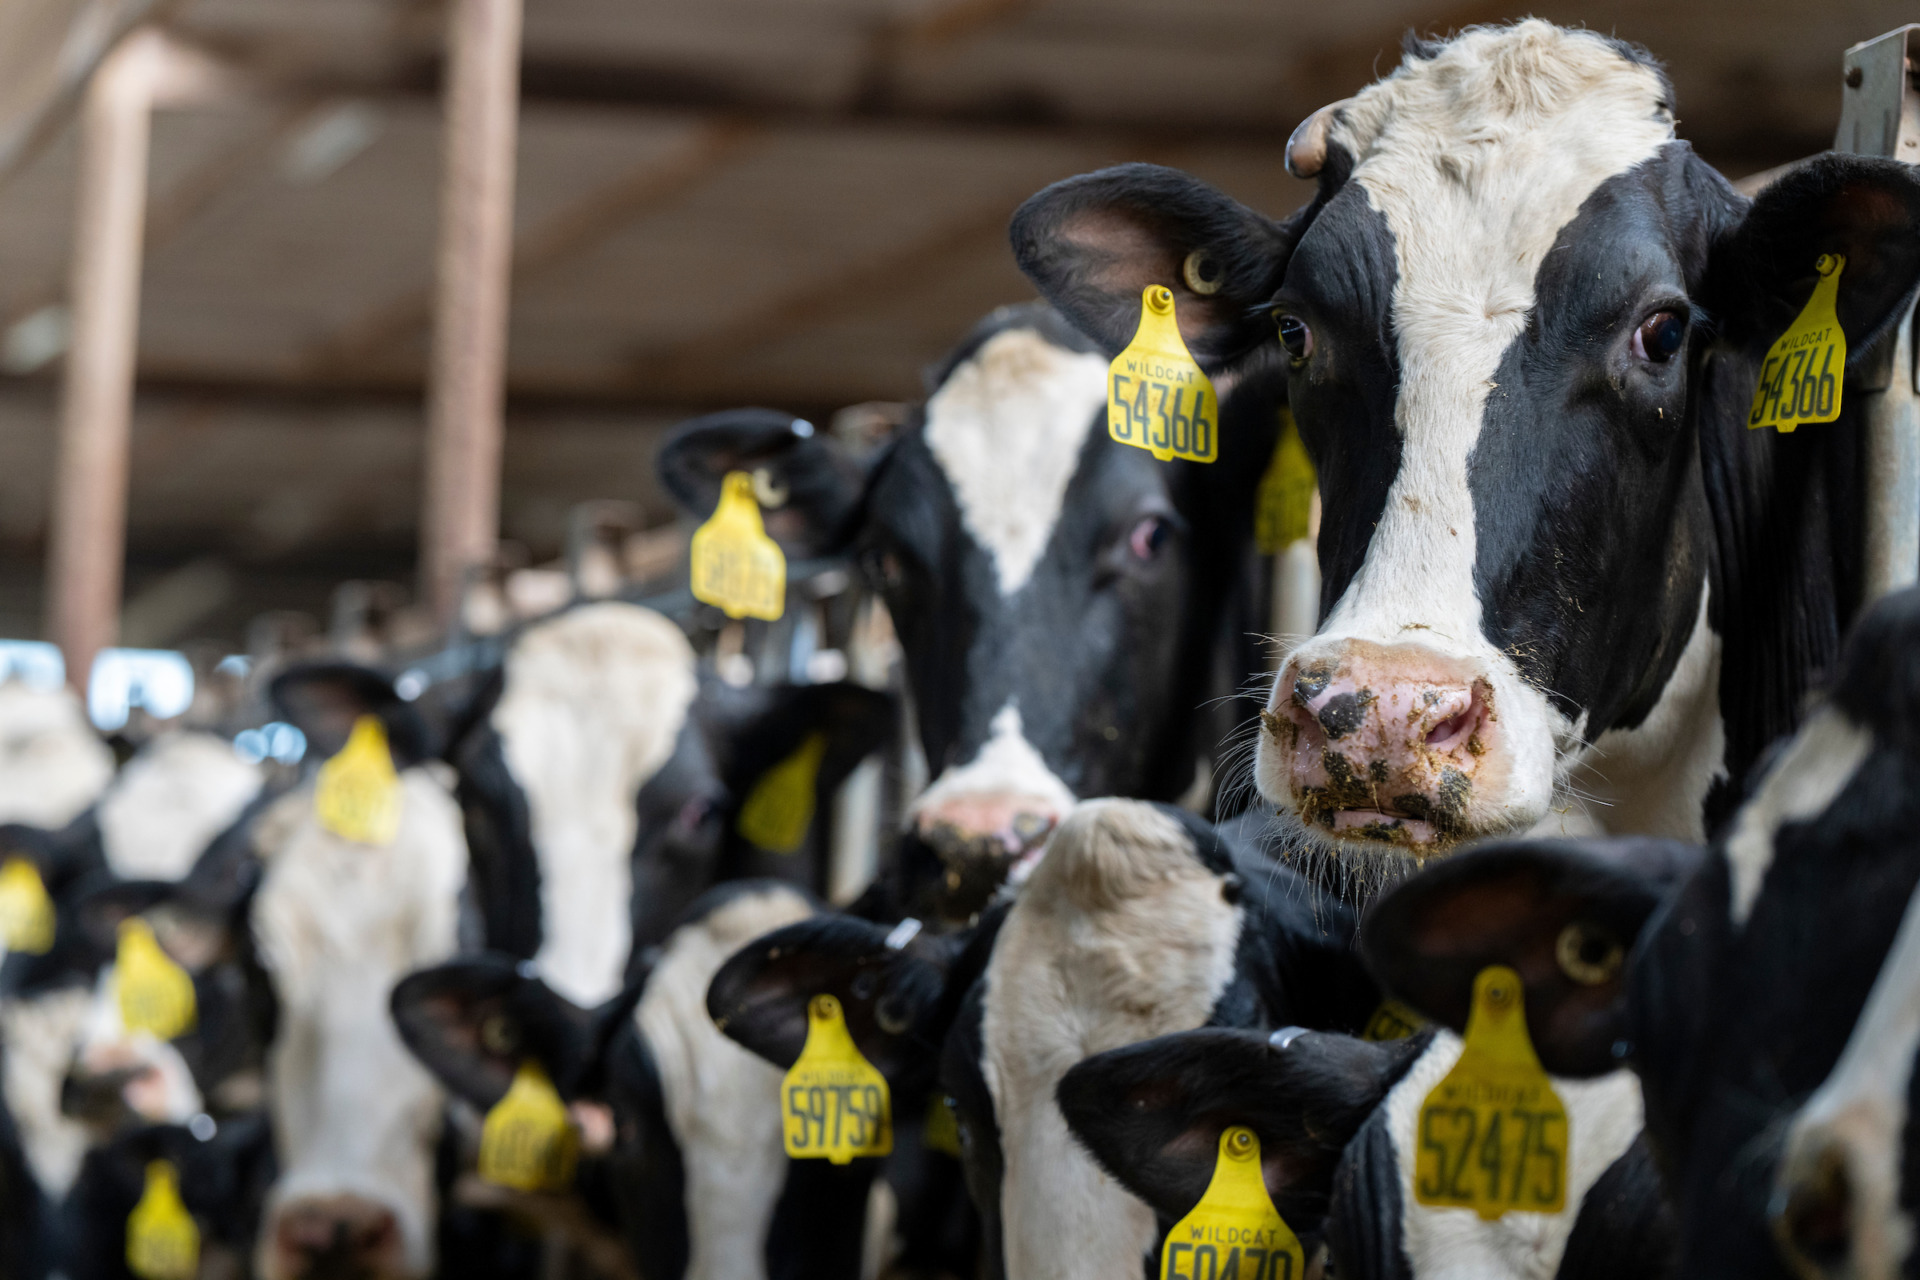 The search for thermotolerant dairy cows